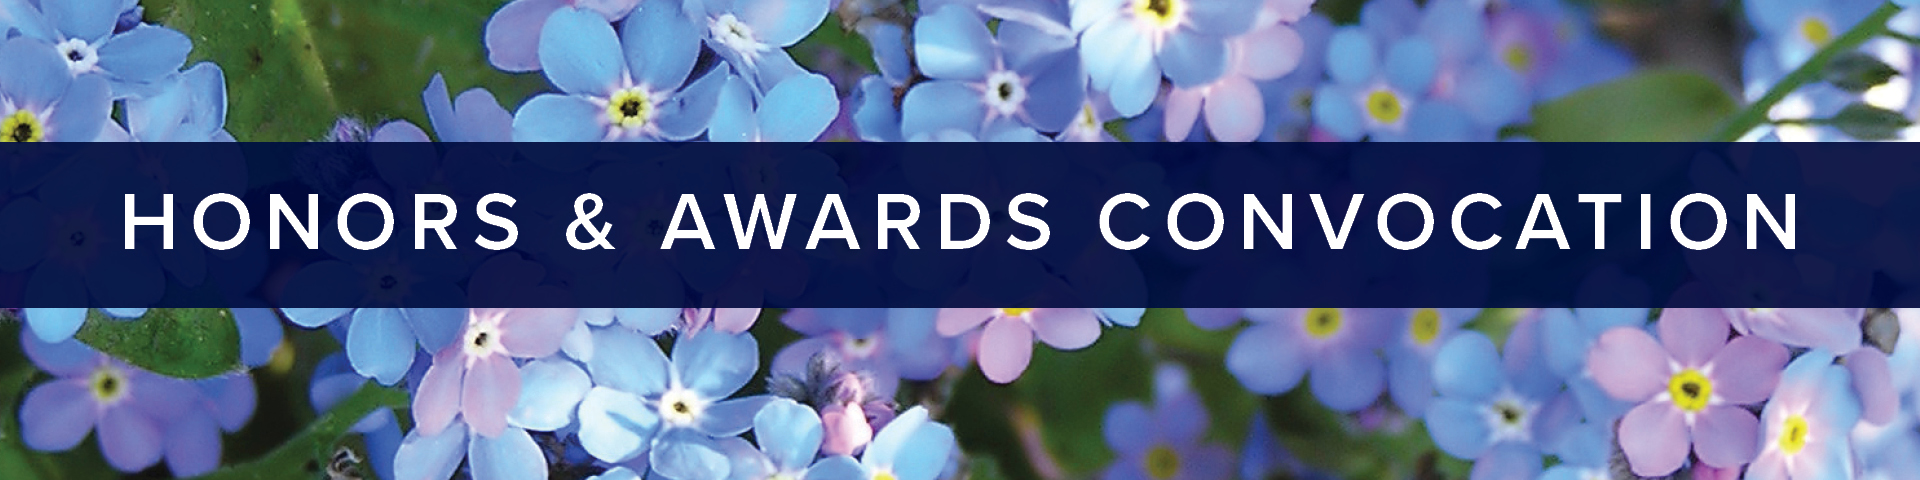 Words "Honors and Awards Convocation" on image of blue forget-me-not flowers